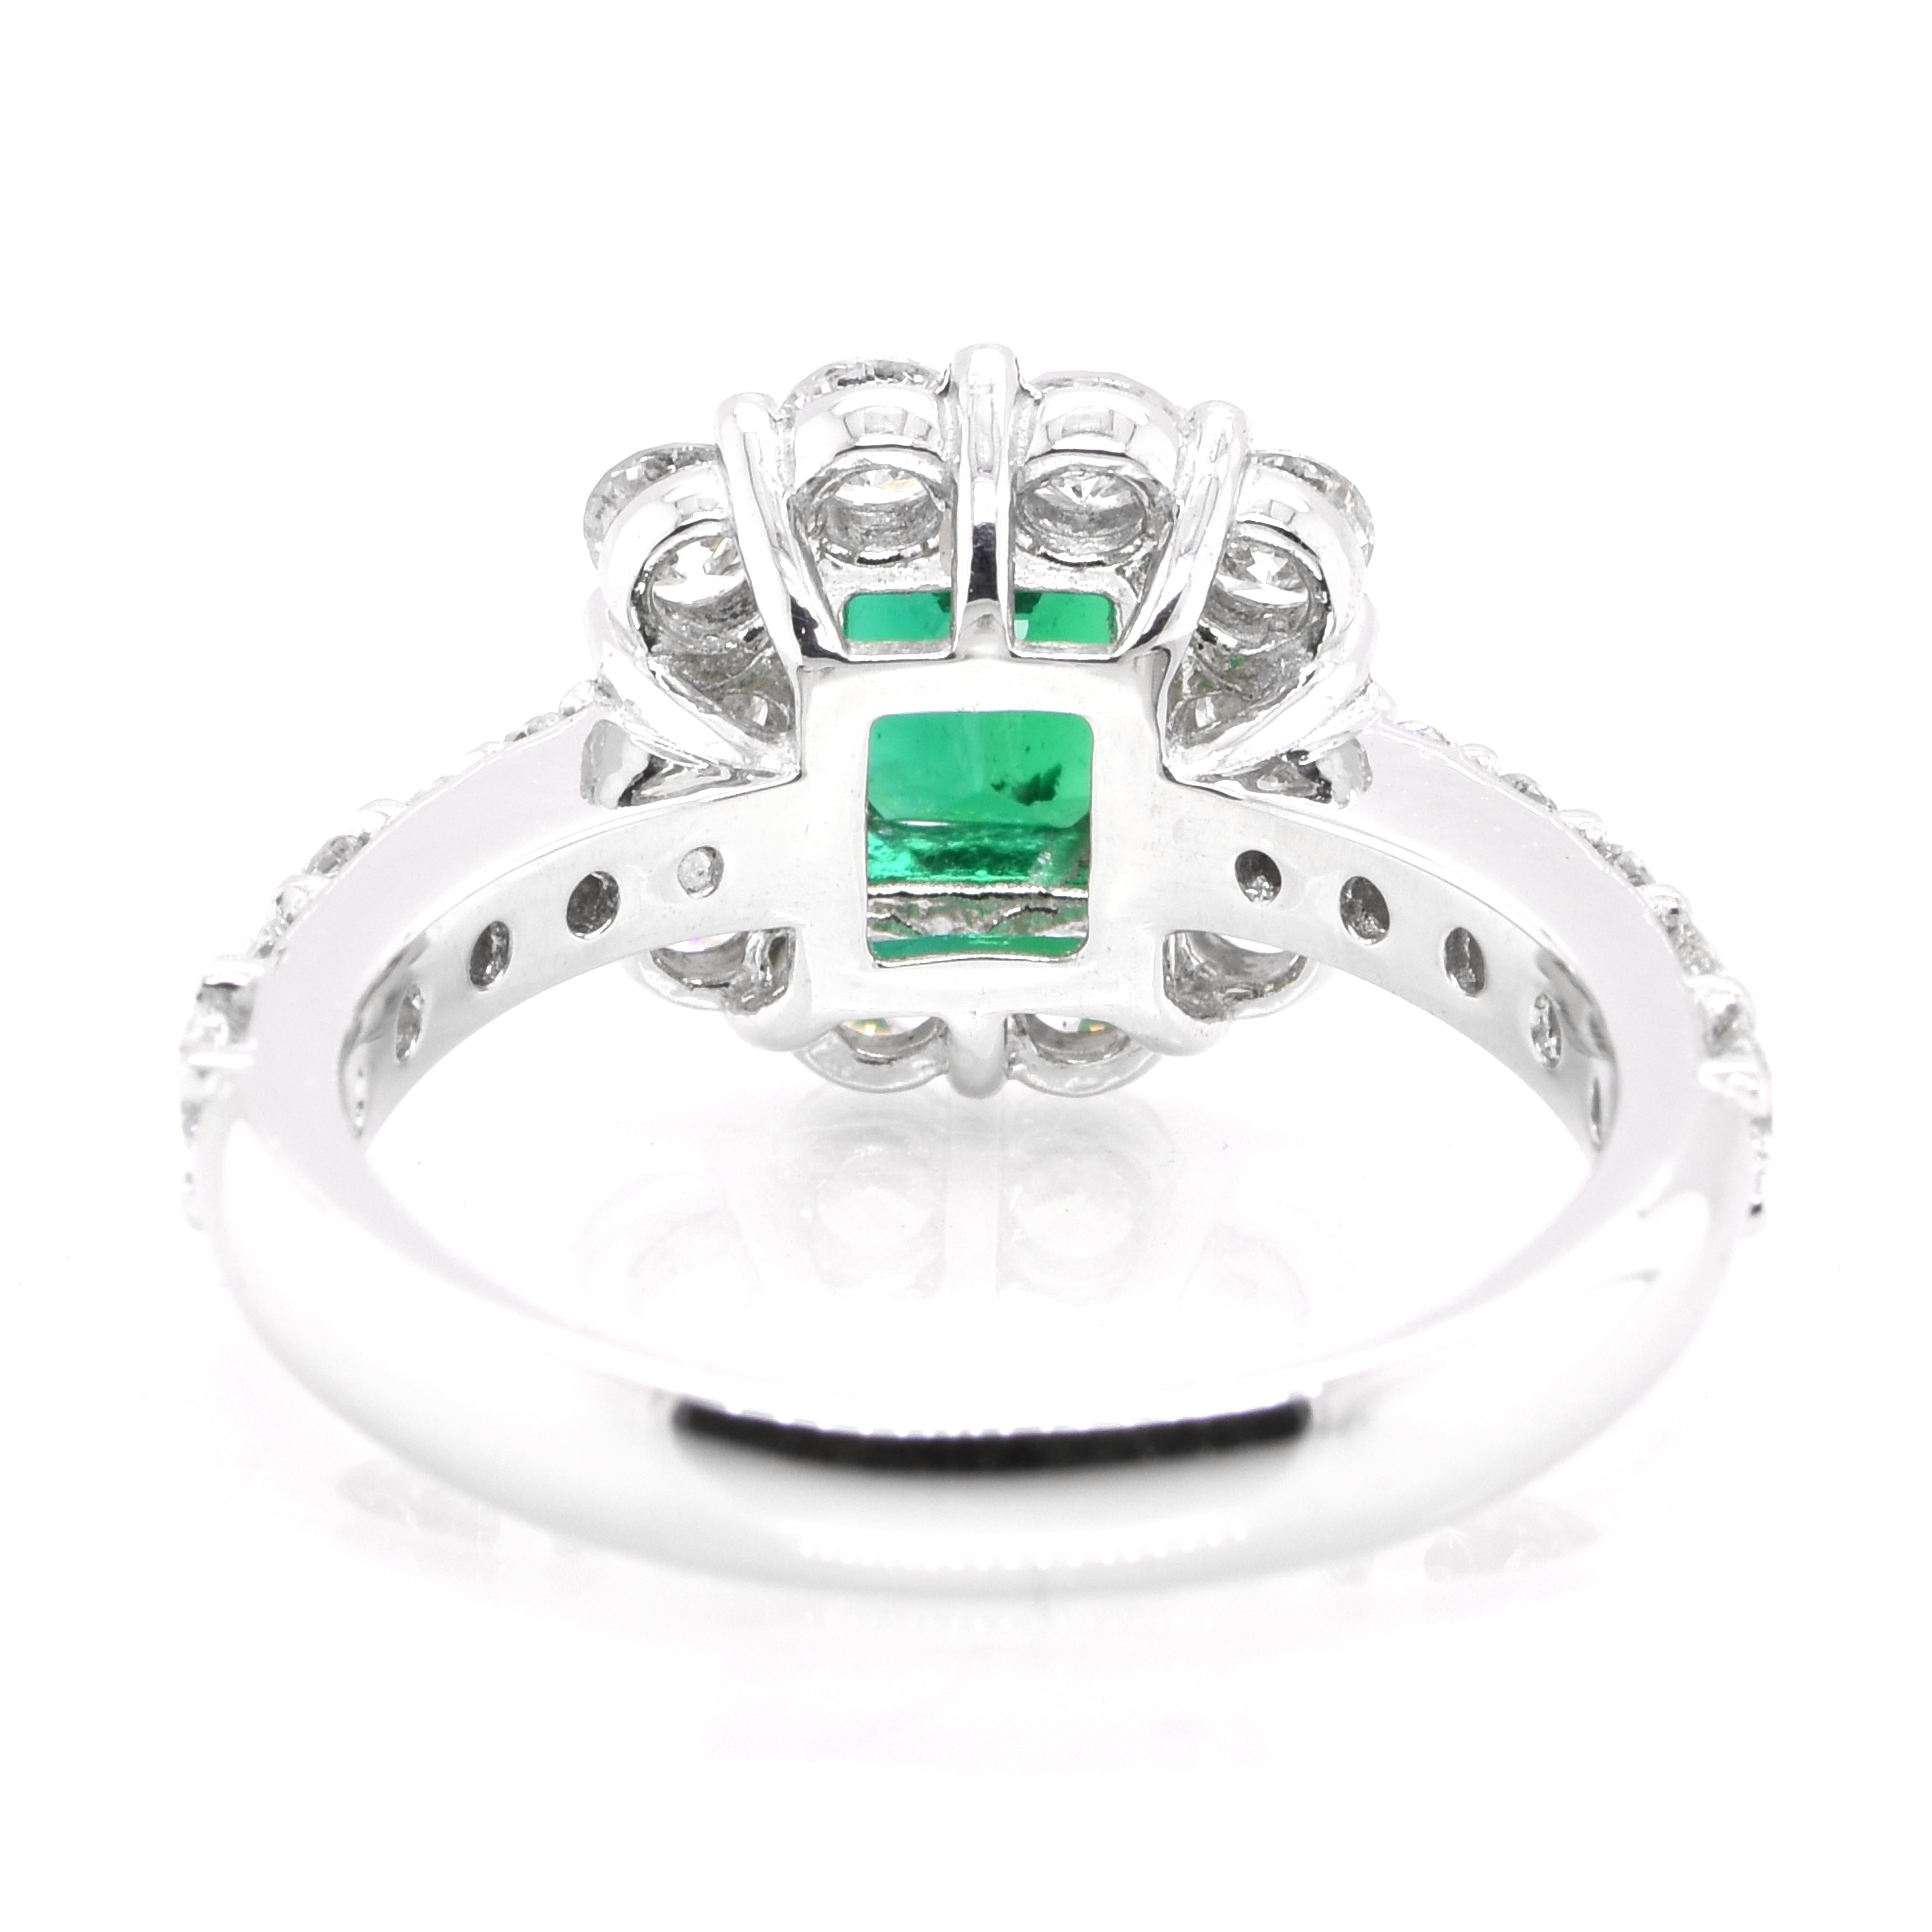 Women's 0.89 Carat Vivid Green Emerald and Diamond Halo Ring Set in Platinum For Sale